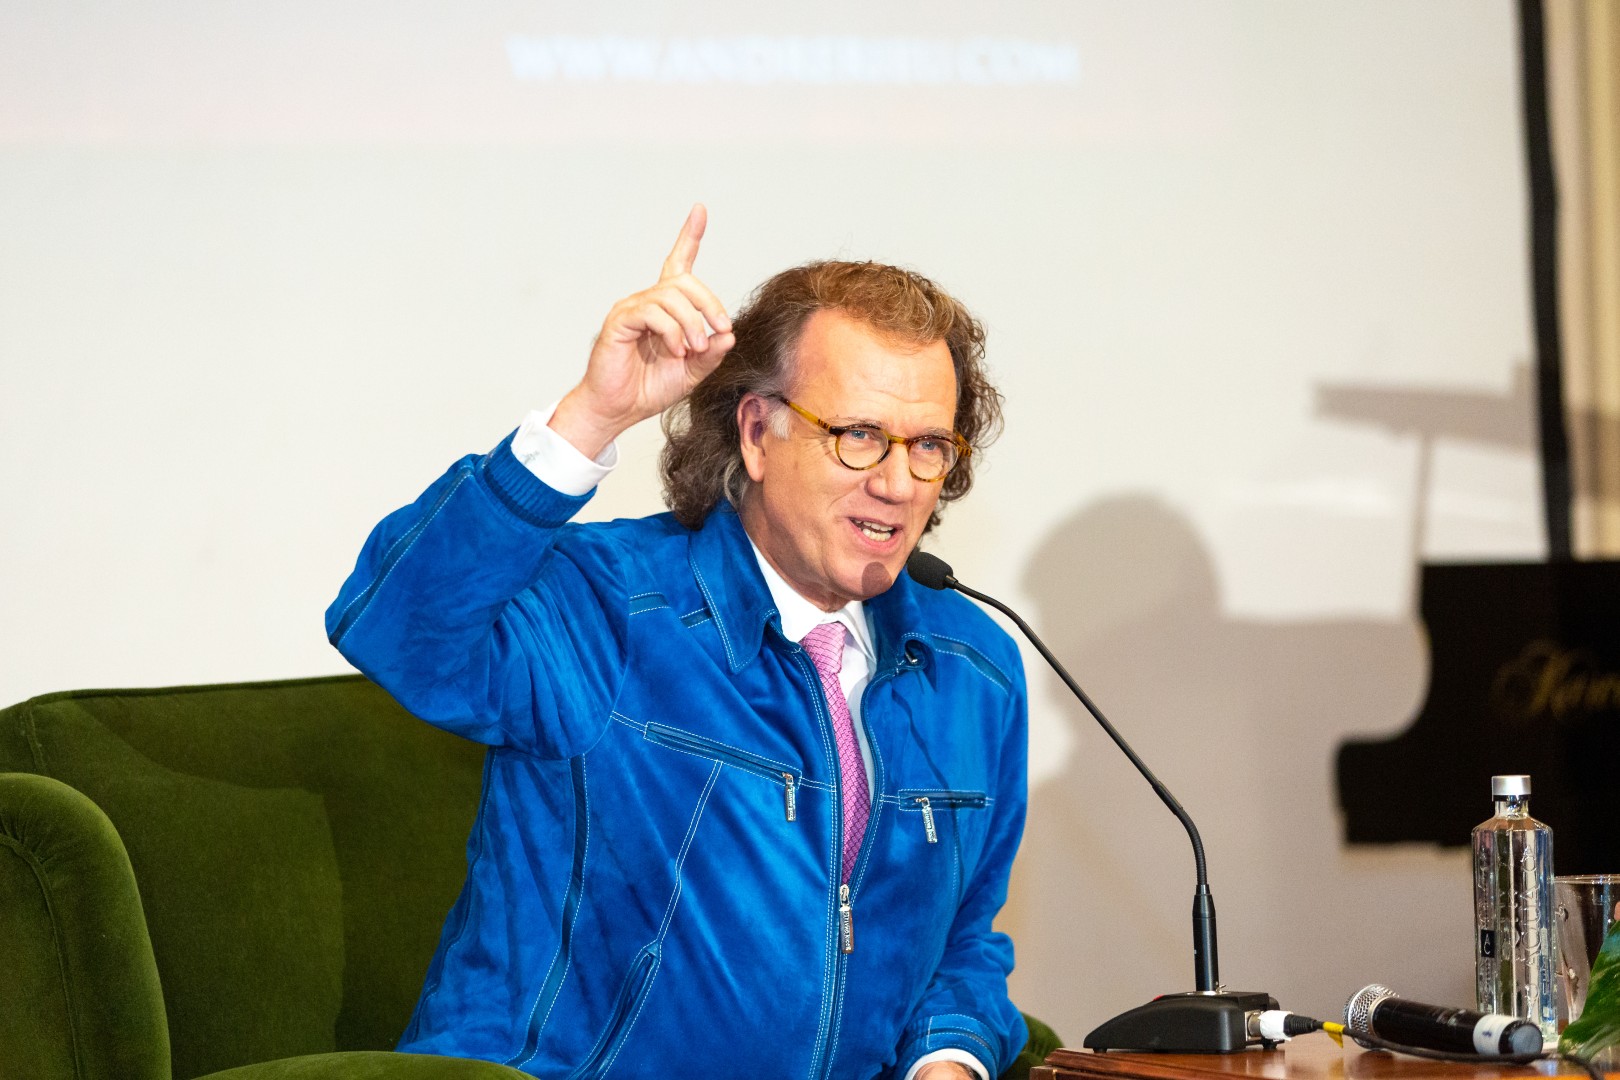 André Rieu at Ateneul Român in Bucharest on December 9, 2014 (e7676ad4ab)